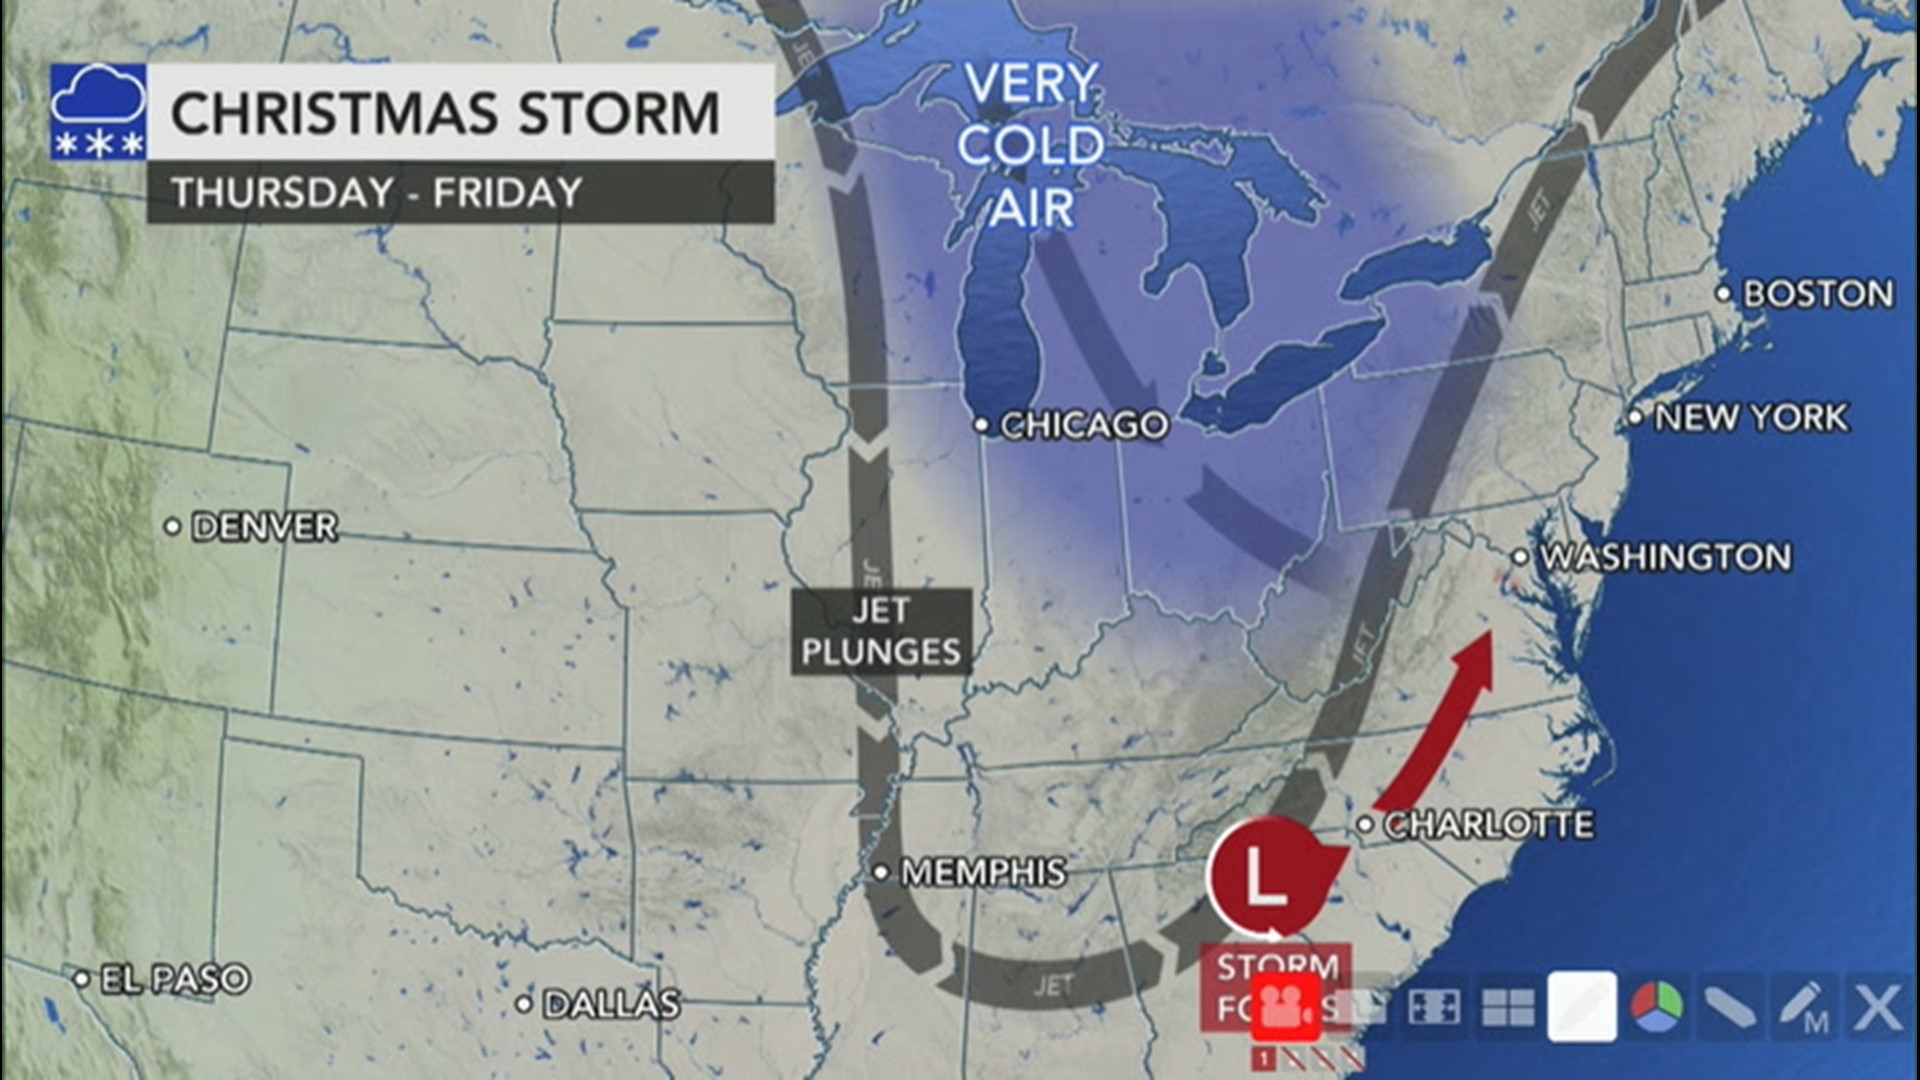 Bernie Rayno says more snow could be in store for the Northeast, but the strength of the storm is still uncertain.